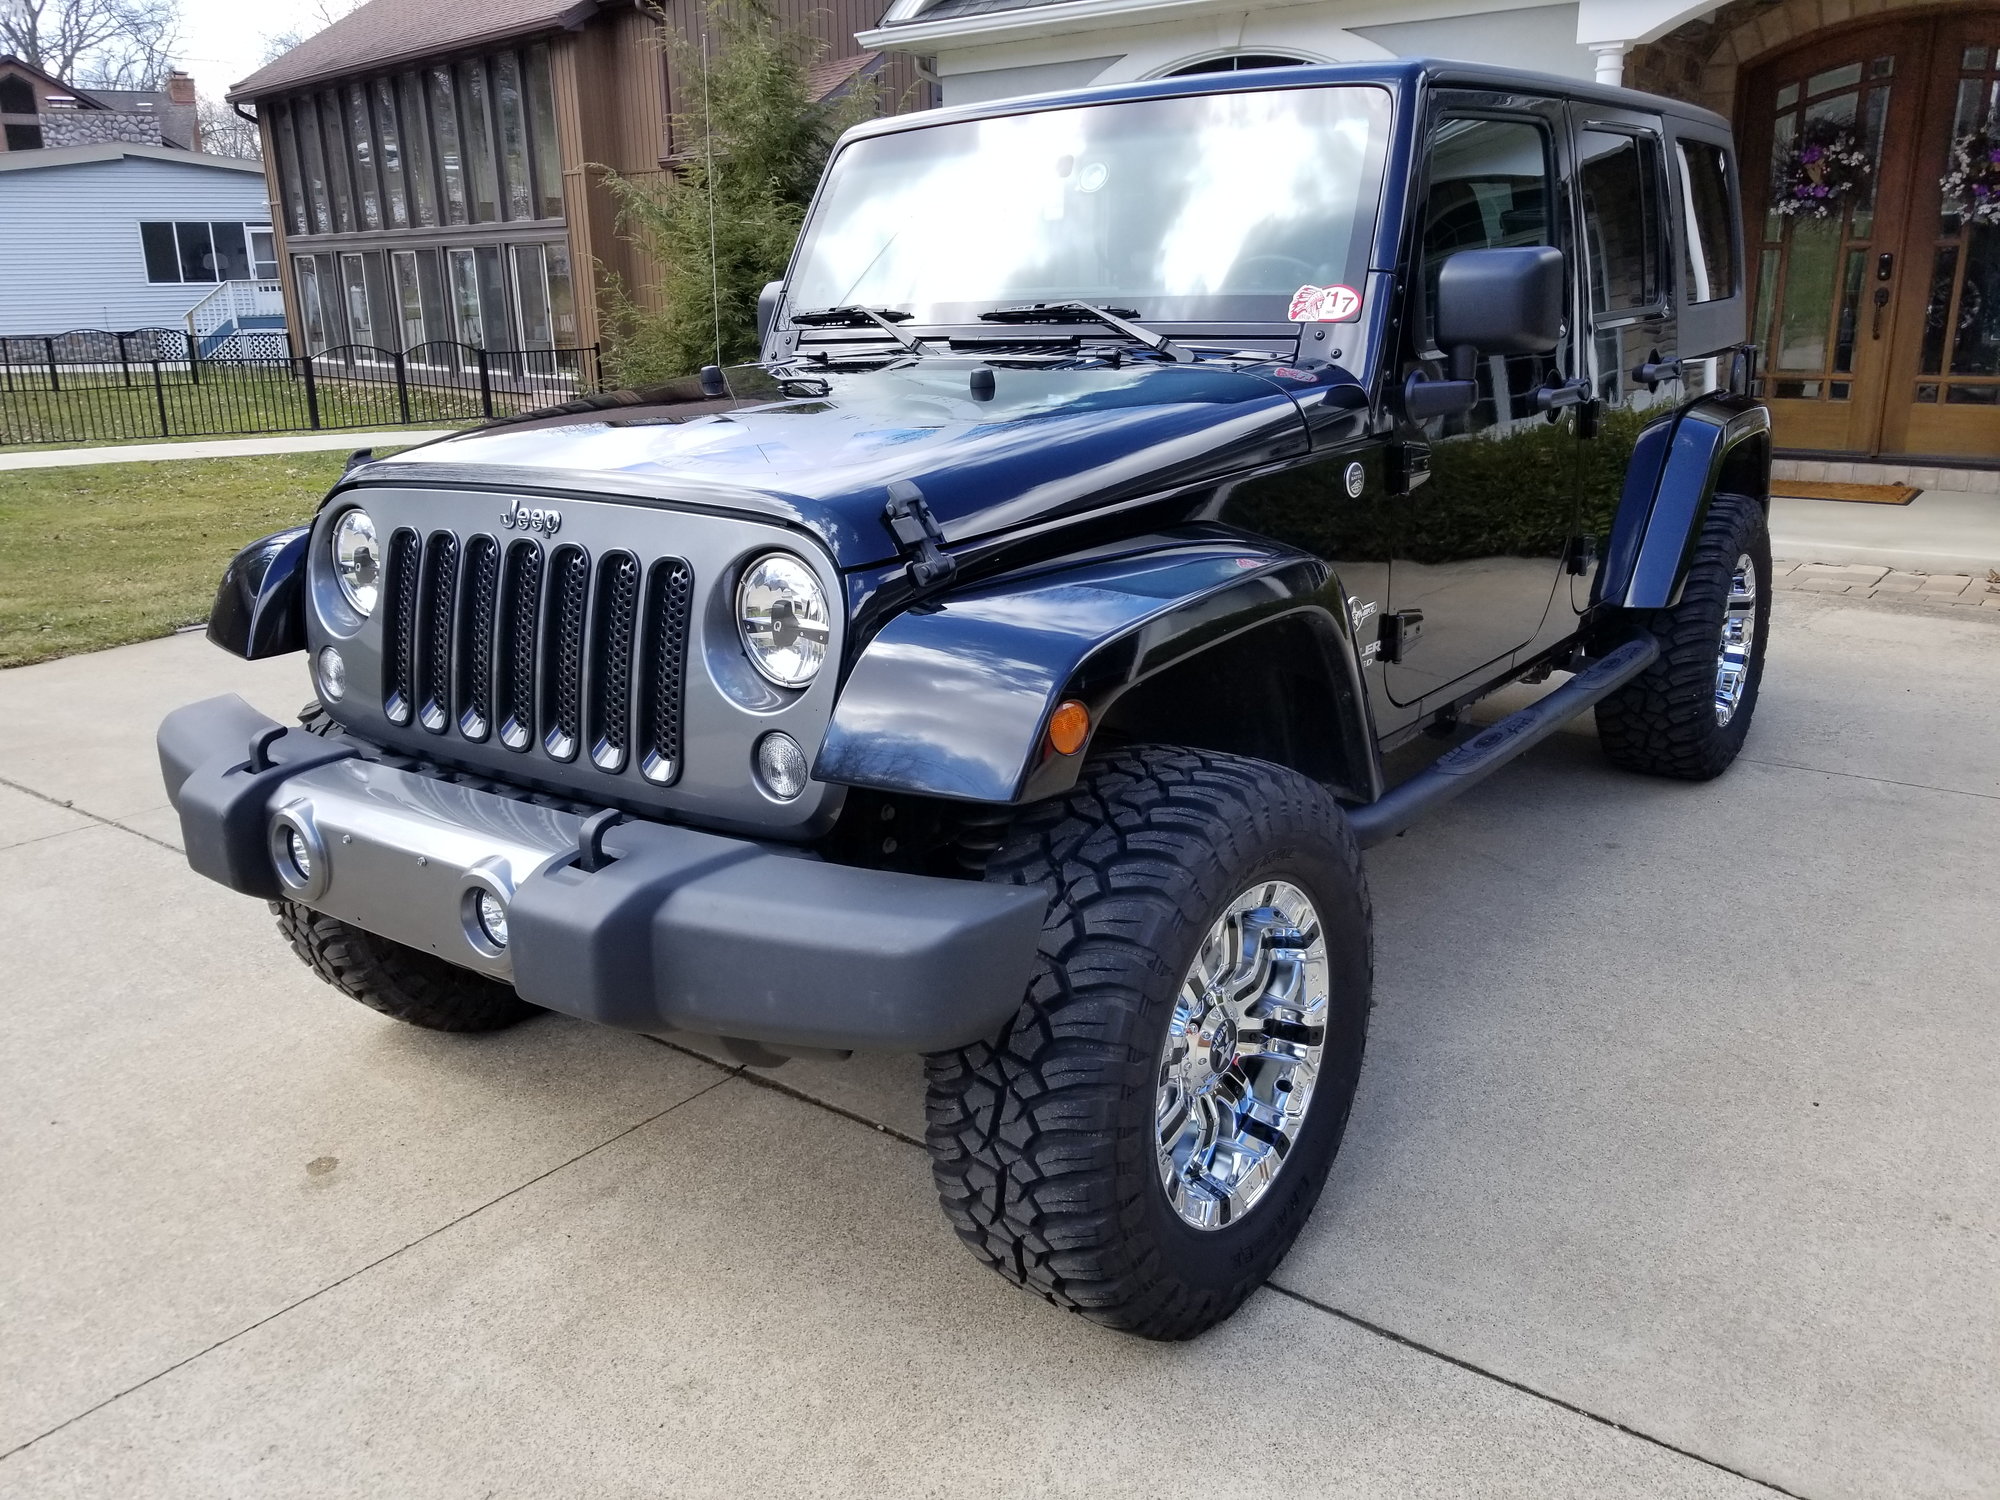 2014 Jeep Wrangler - 2014 Jeep Wrangler Unlimited Sport 4x4 Oscar Mike Edition - Used - VIN 1C4BJWDG7EL199554 - 65,000 Miles - 6 cyl - 4WD - Automatic - SUV - Black - Malvern, OH 44644, United States